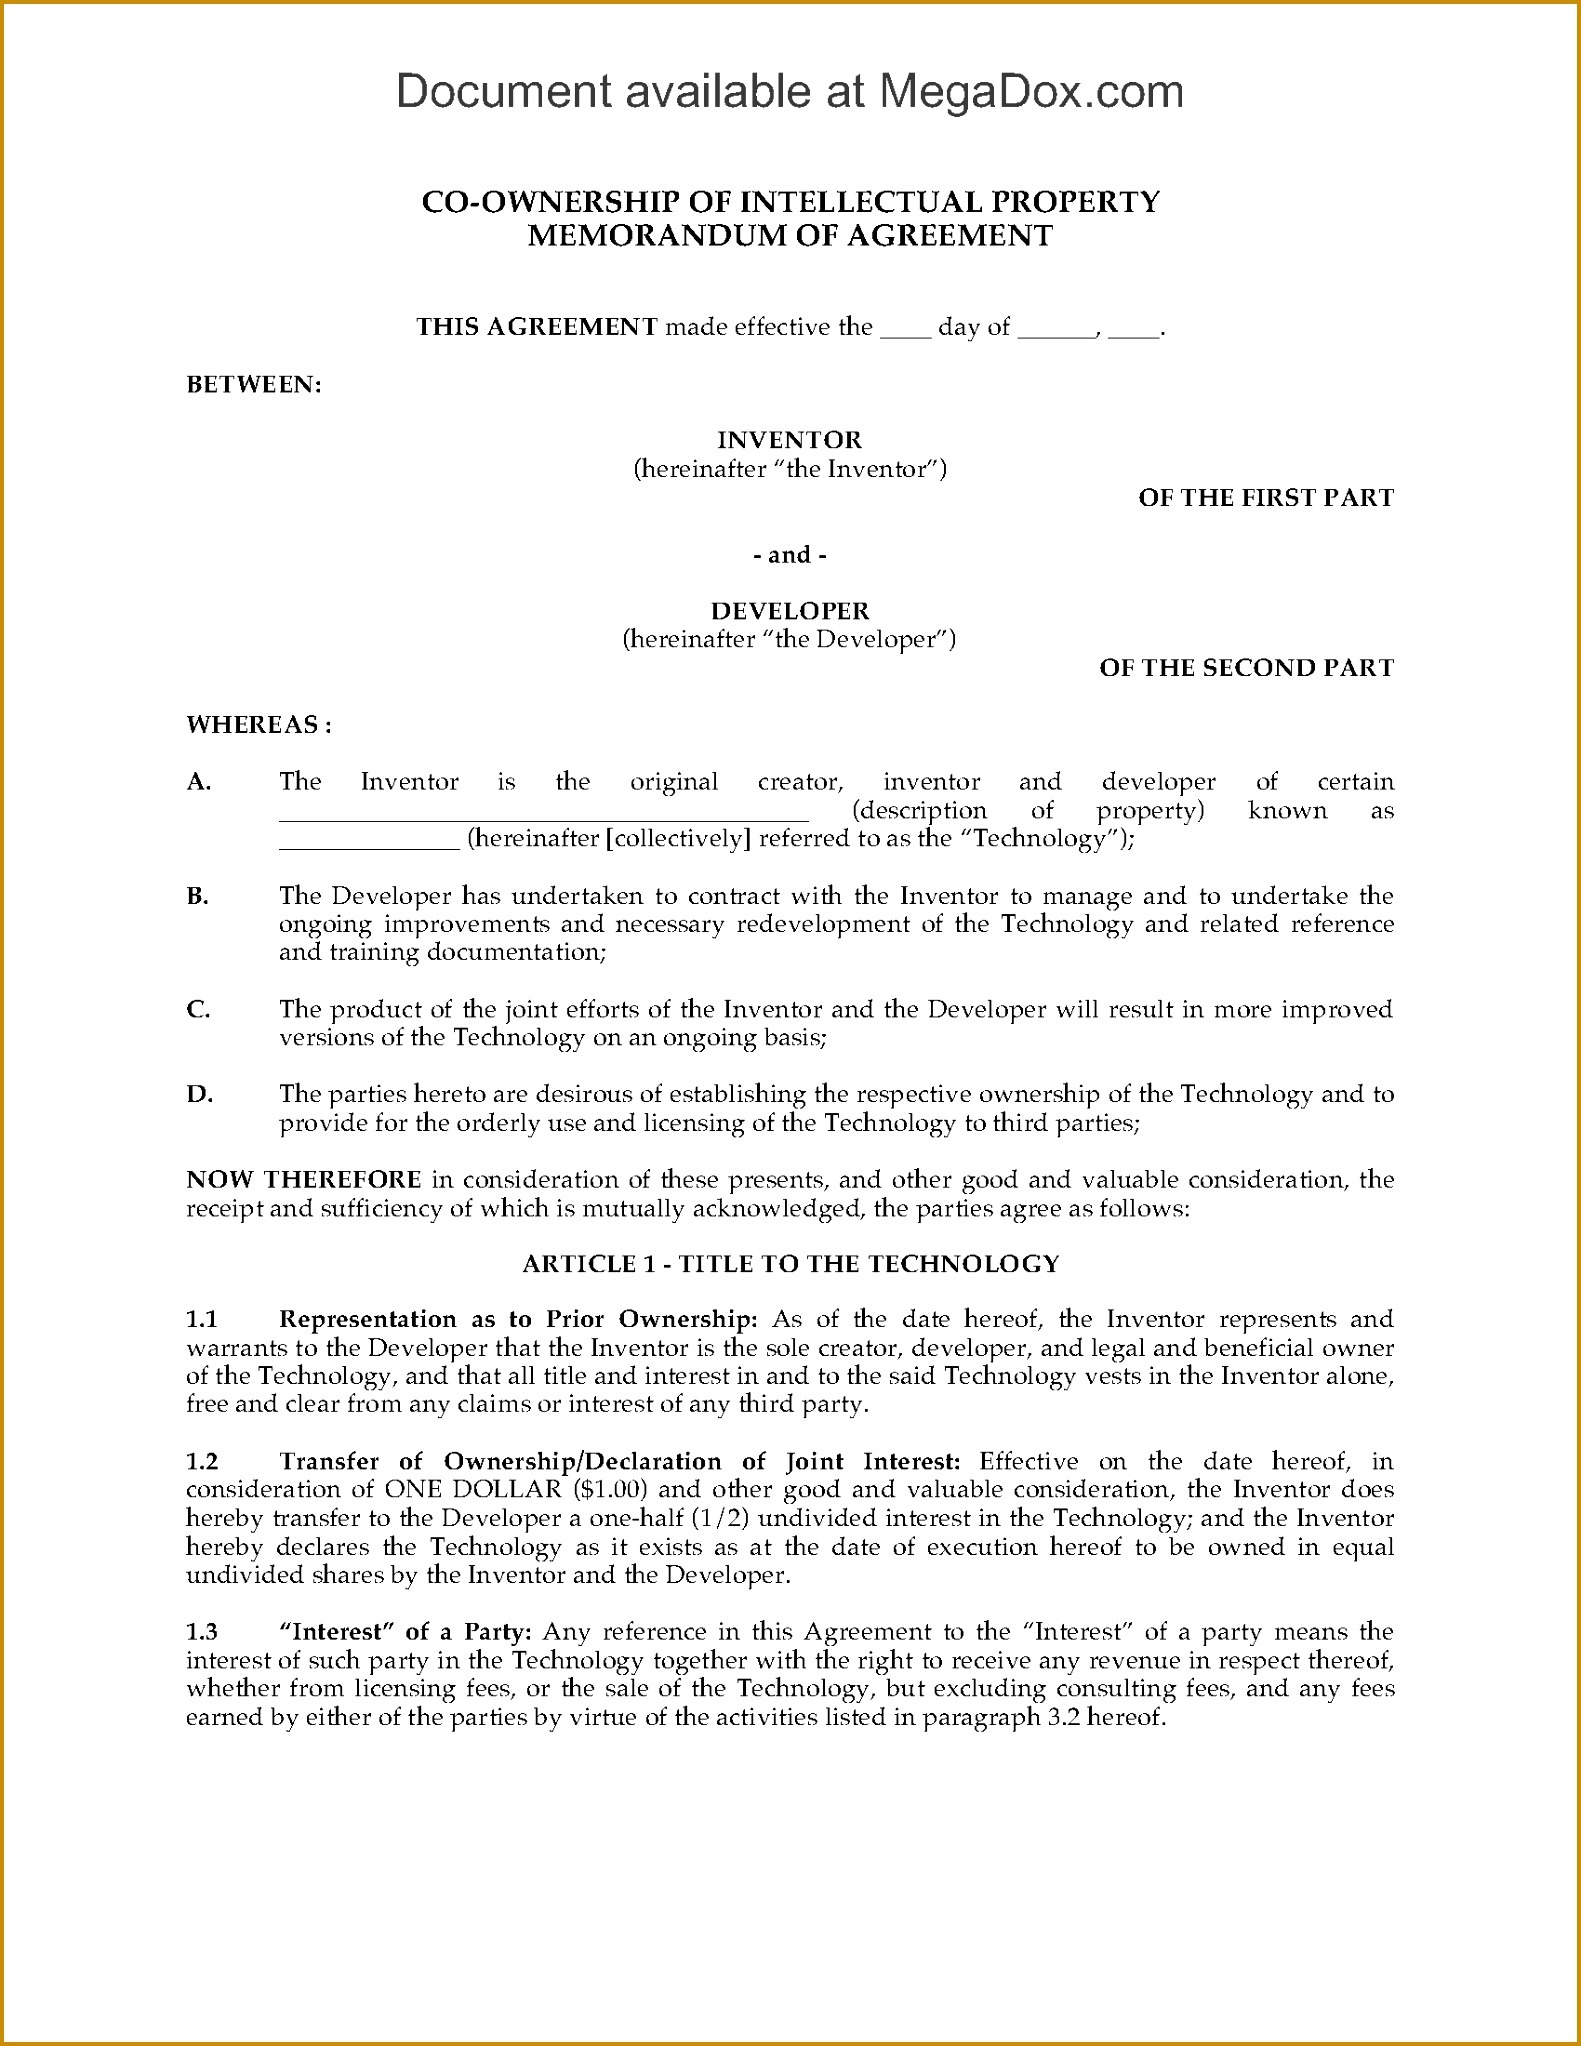 Picture of Co Ownership Agreement for Intellectual Property 20461581